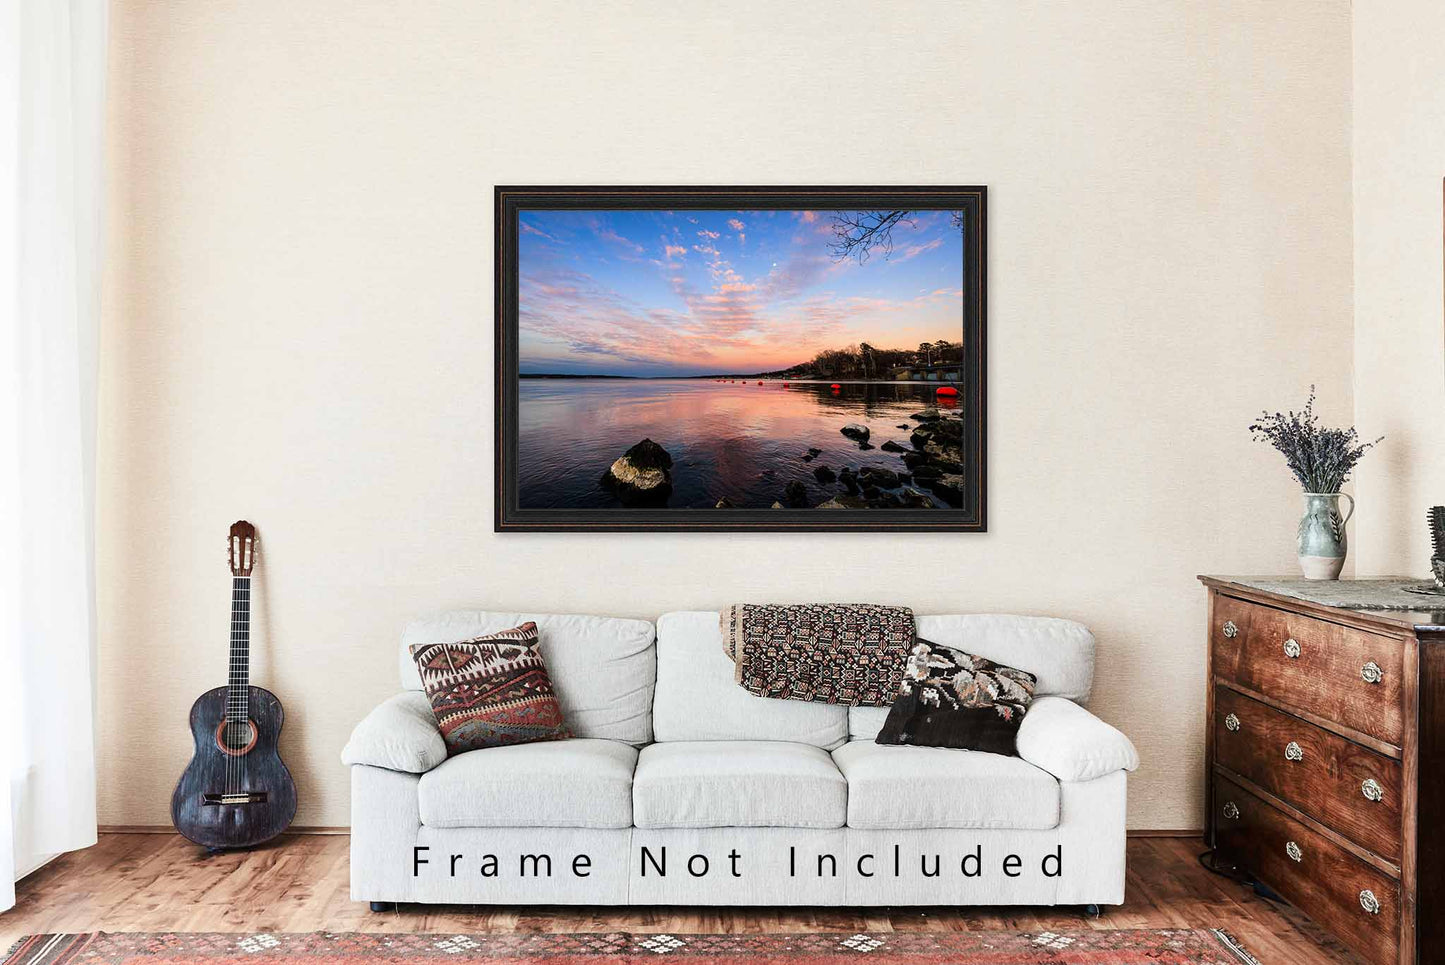 Grand Lake Photography Print | Sunset Picture | Oklahoma Wall Art | Peaceful Photo | Vacation Decor | Not Framed